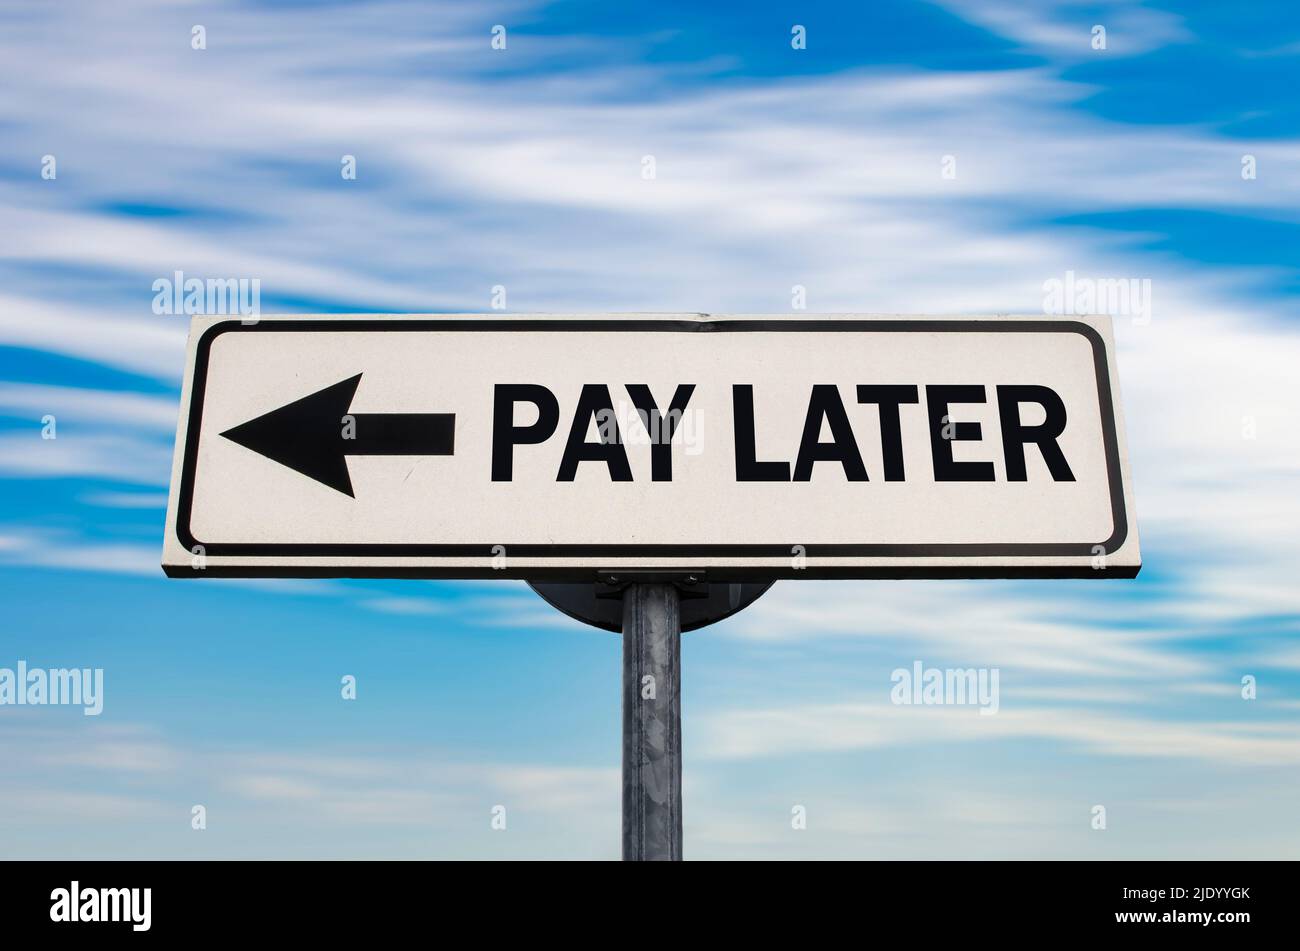 Pay later road sign, arrow on blue sky background. One way blank road sign with copy space. Arrow on a pole pointing in one direction. Stock Photo